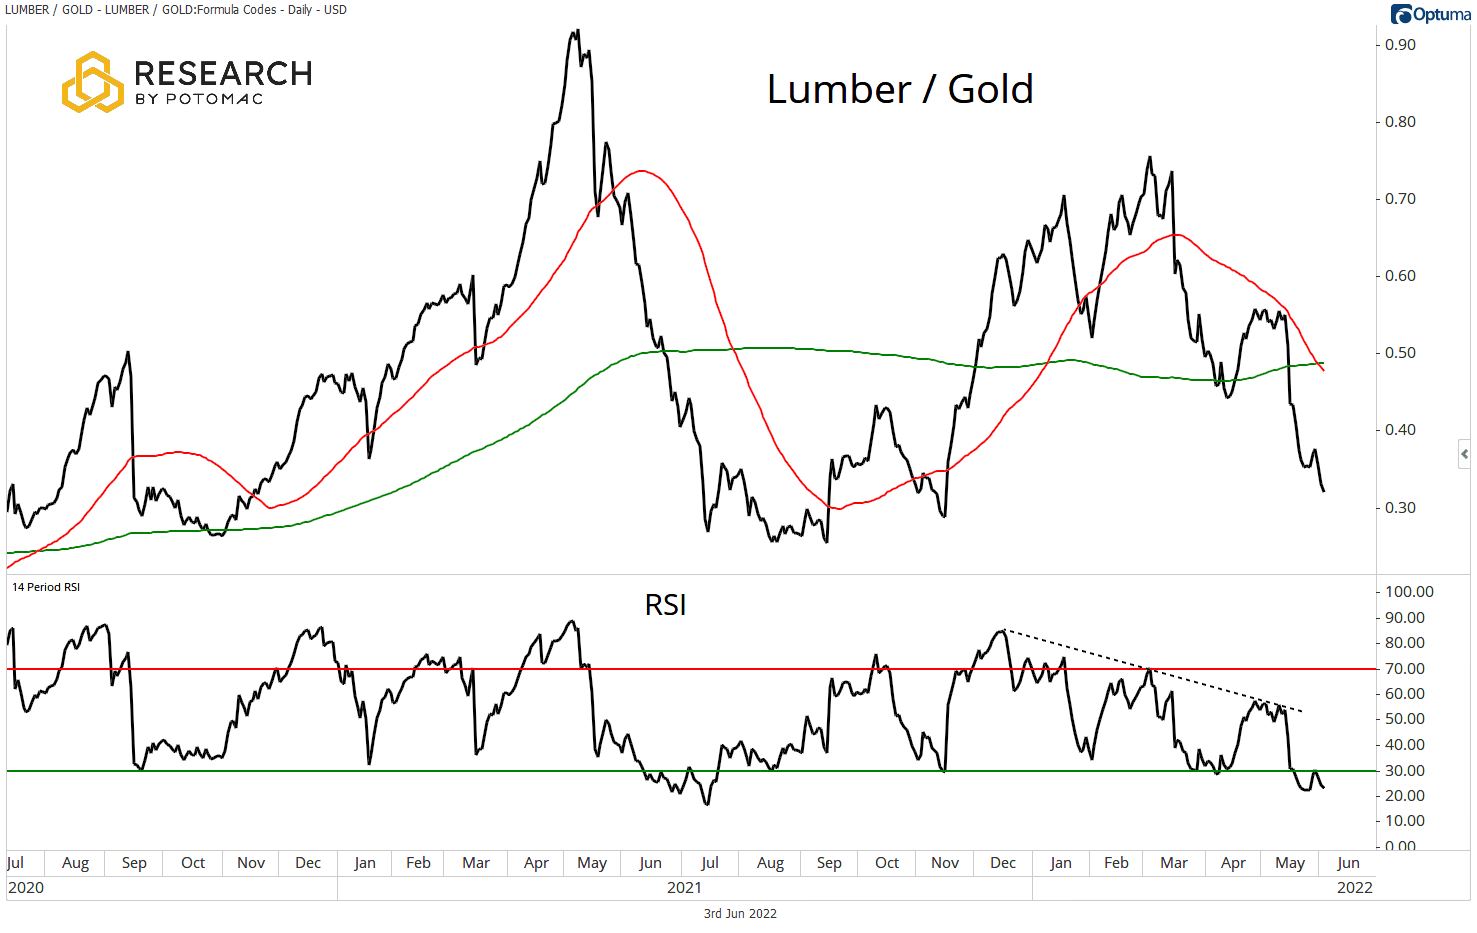 Lumber / Gold chart for March 25th research.